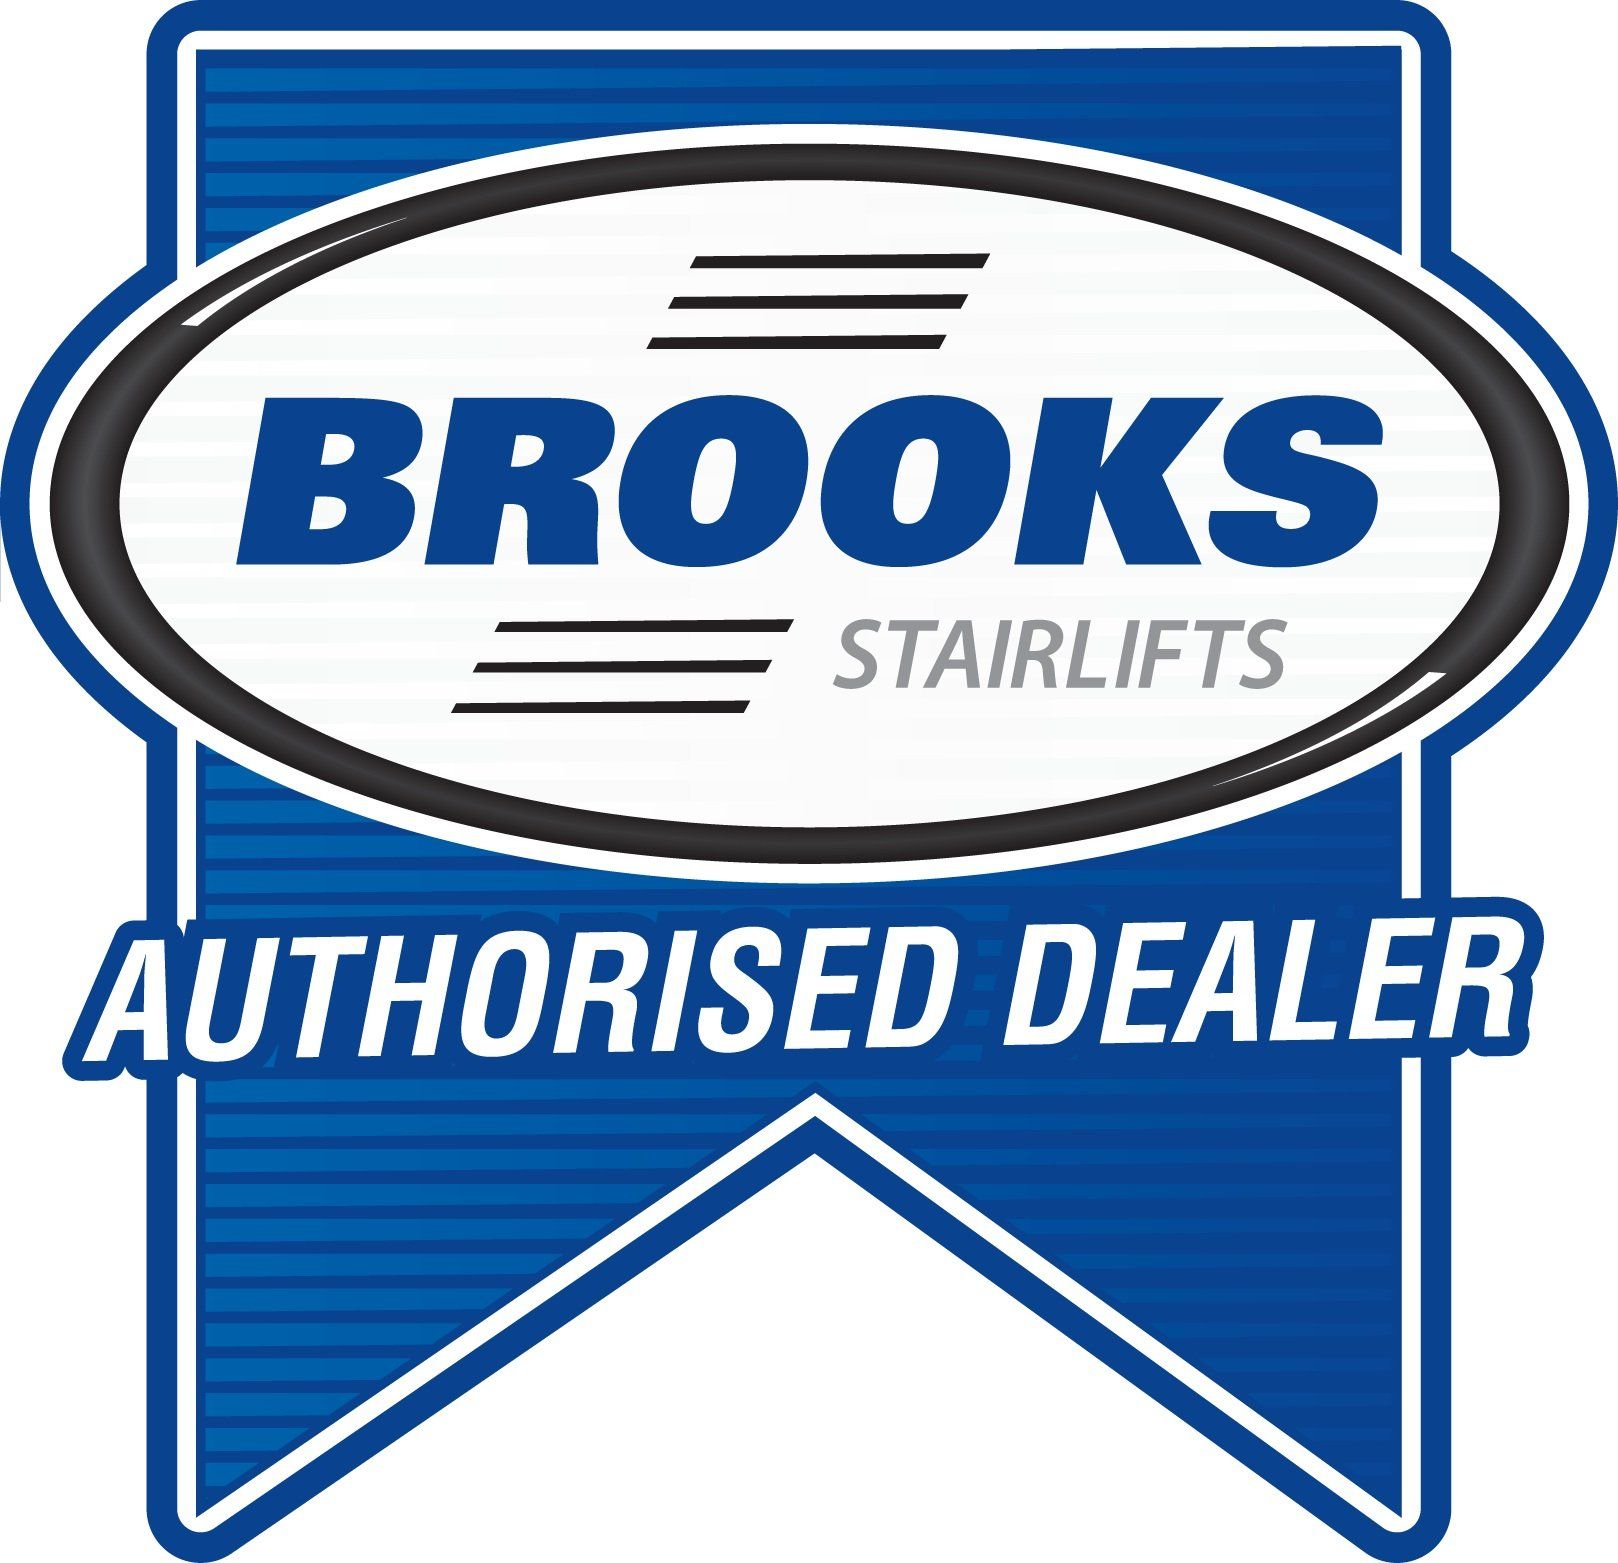 Brooks Stairlifts Authorised Dealer - Helping Hand Stairlifts